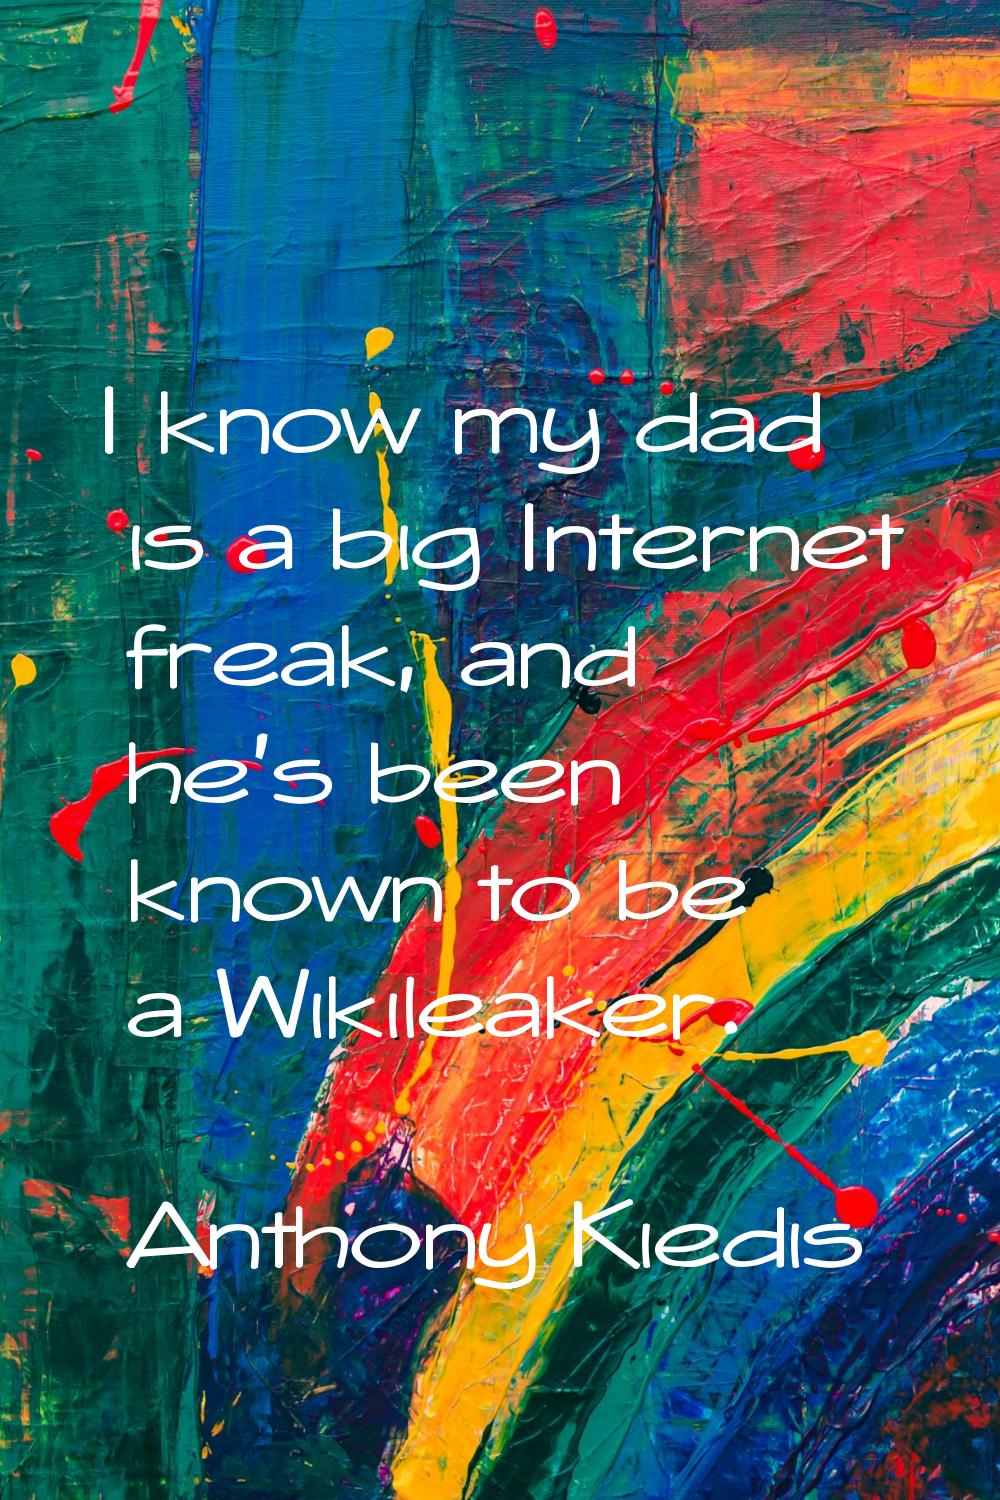 I know my dad is a big Internet freak, and he's been known to be a Wikileaker.